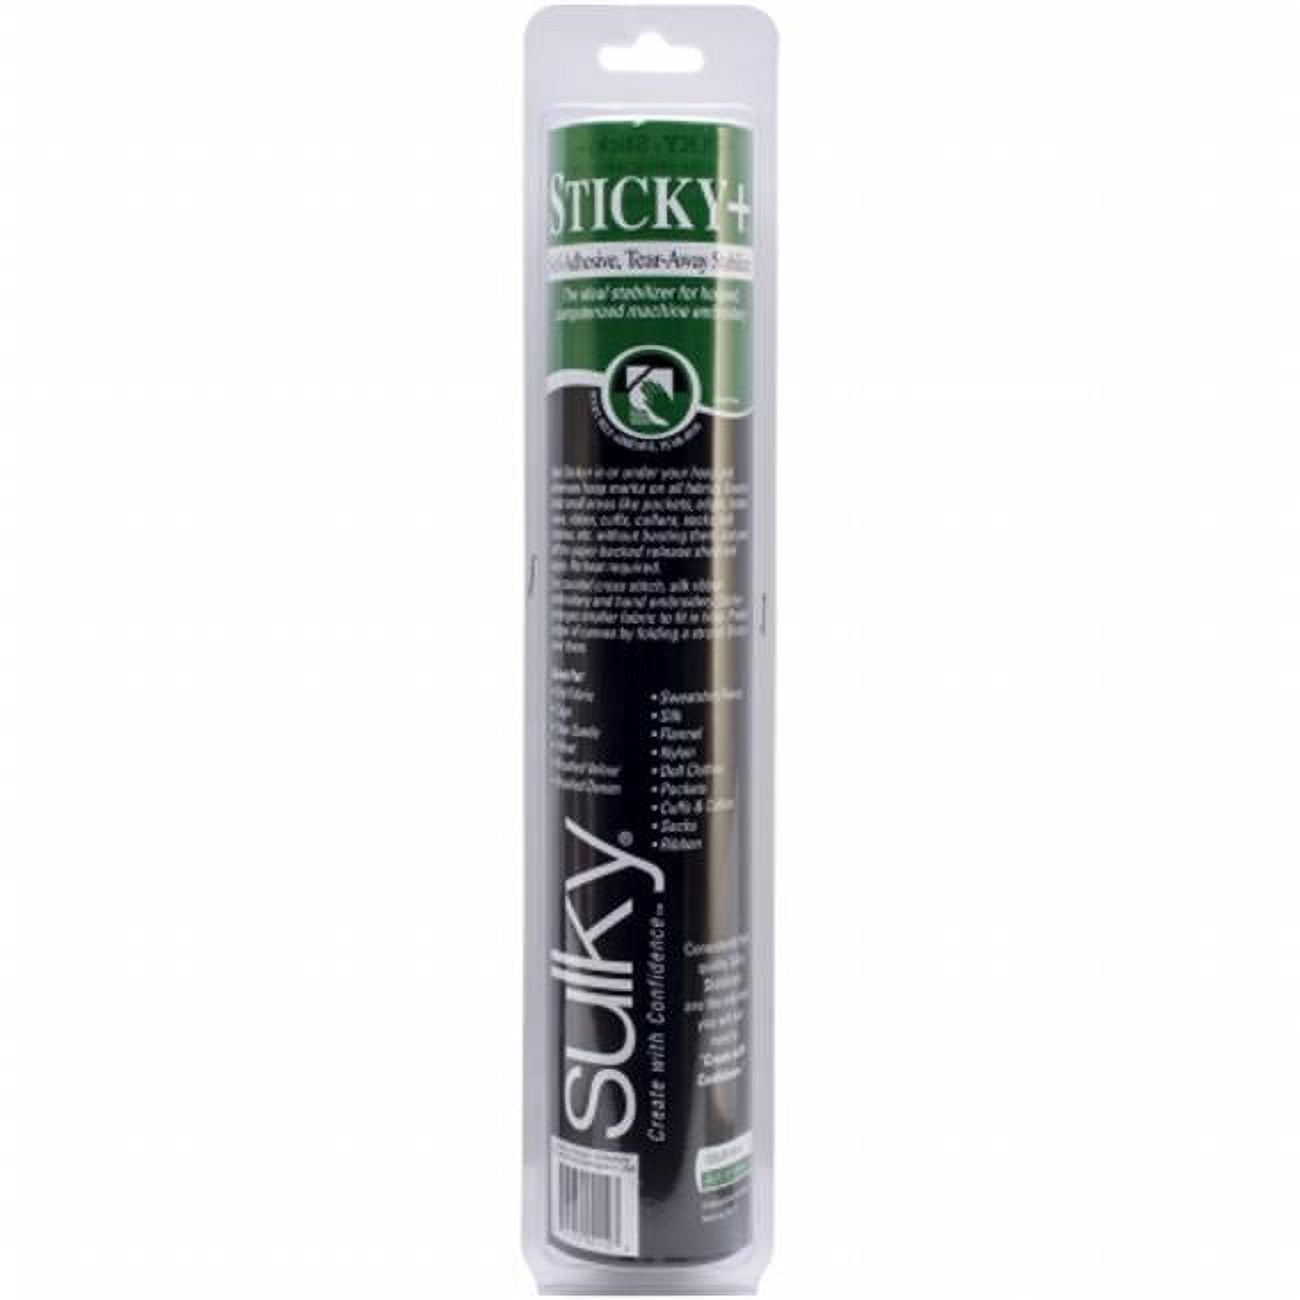 Sulky Sticky Self-Adhesive Tear-Away Stabilizer Roll, 12" X 6 Yds - image 1 of 2